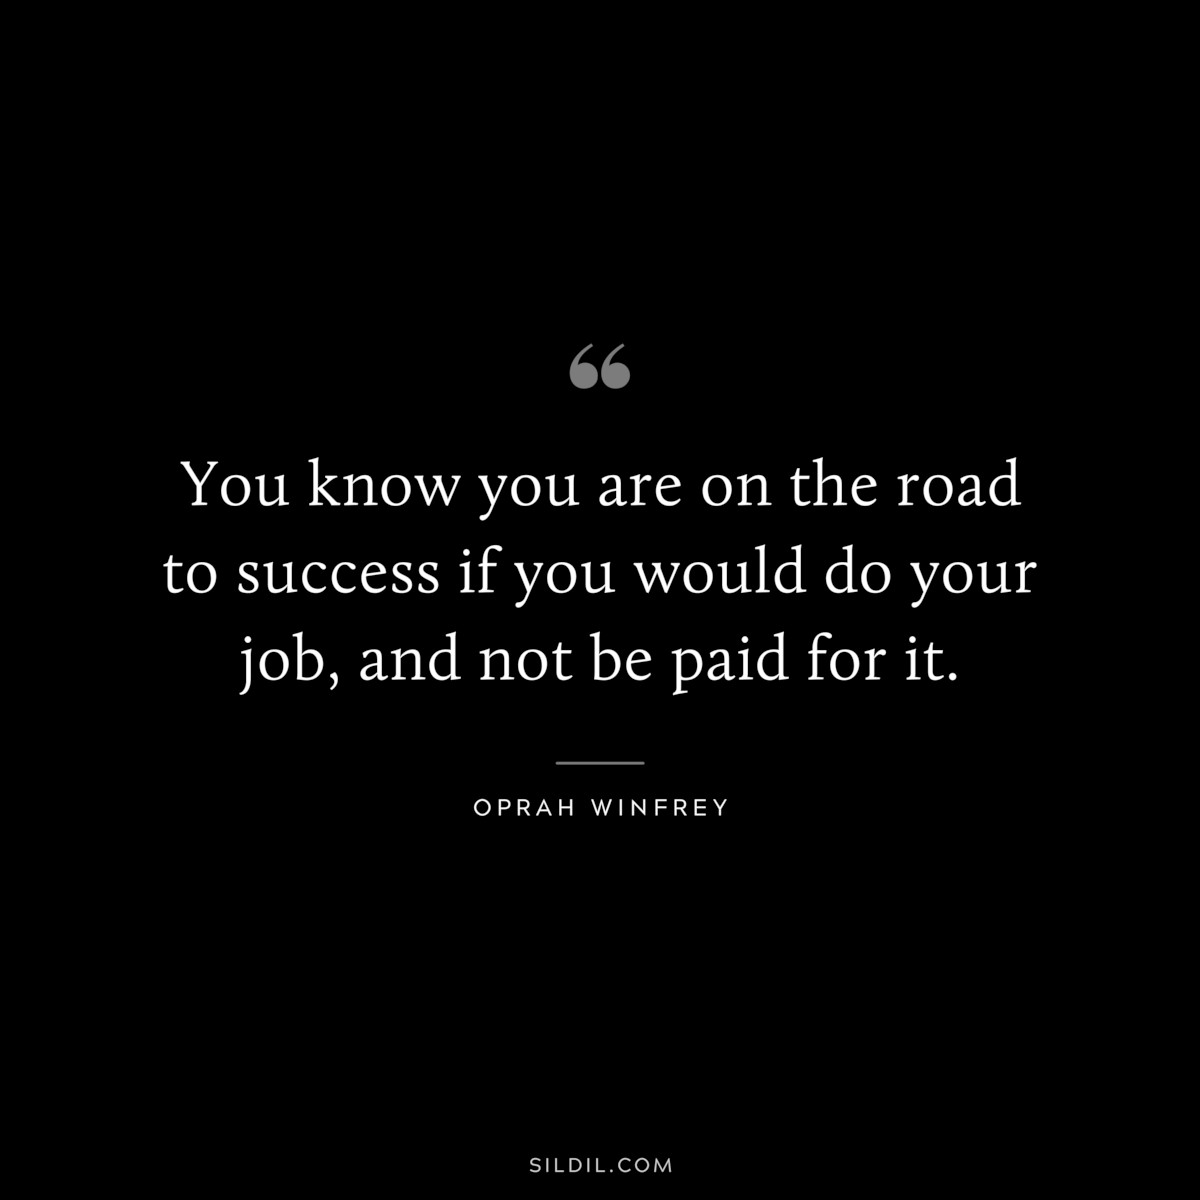 You know you are on the road to success if you would do your job, and not be paid for it. ― Oprah Winfrey